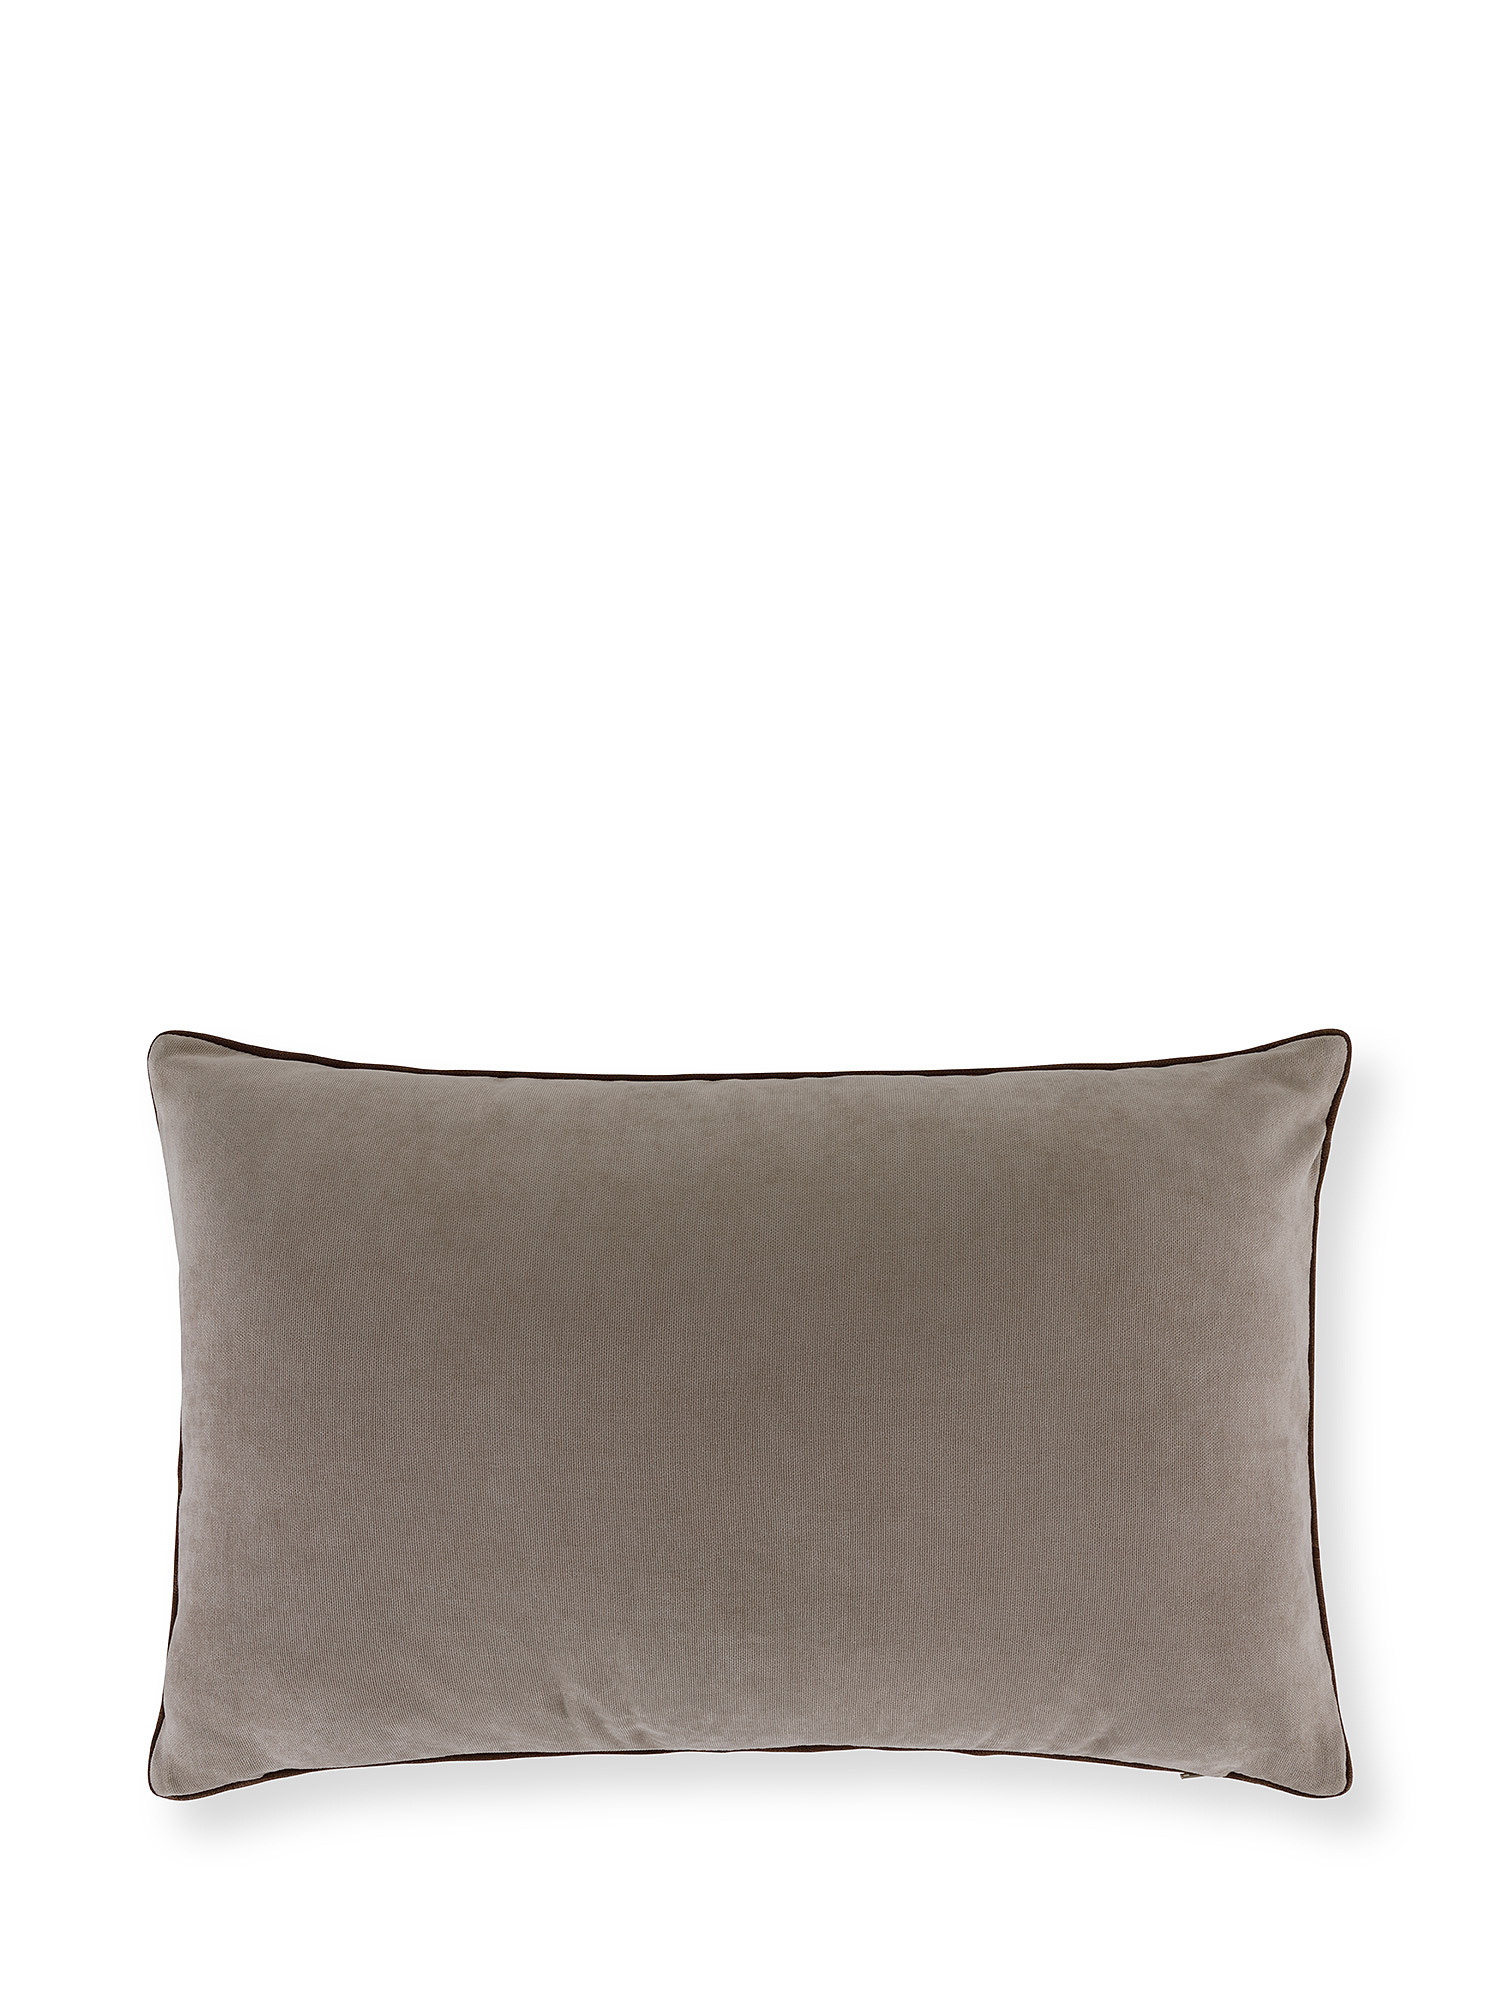 Jacquard cushion with piping 35x55cm, Brown, large image number 1